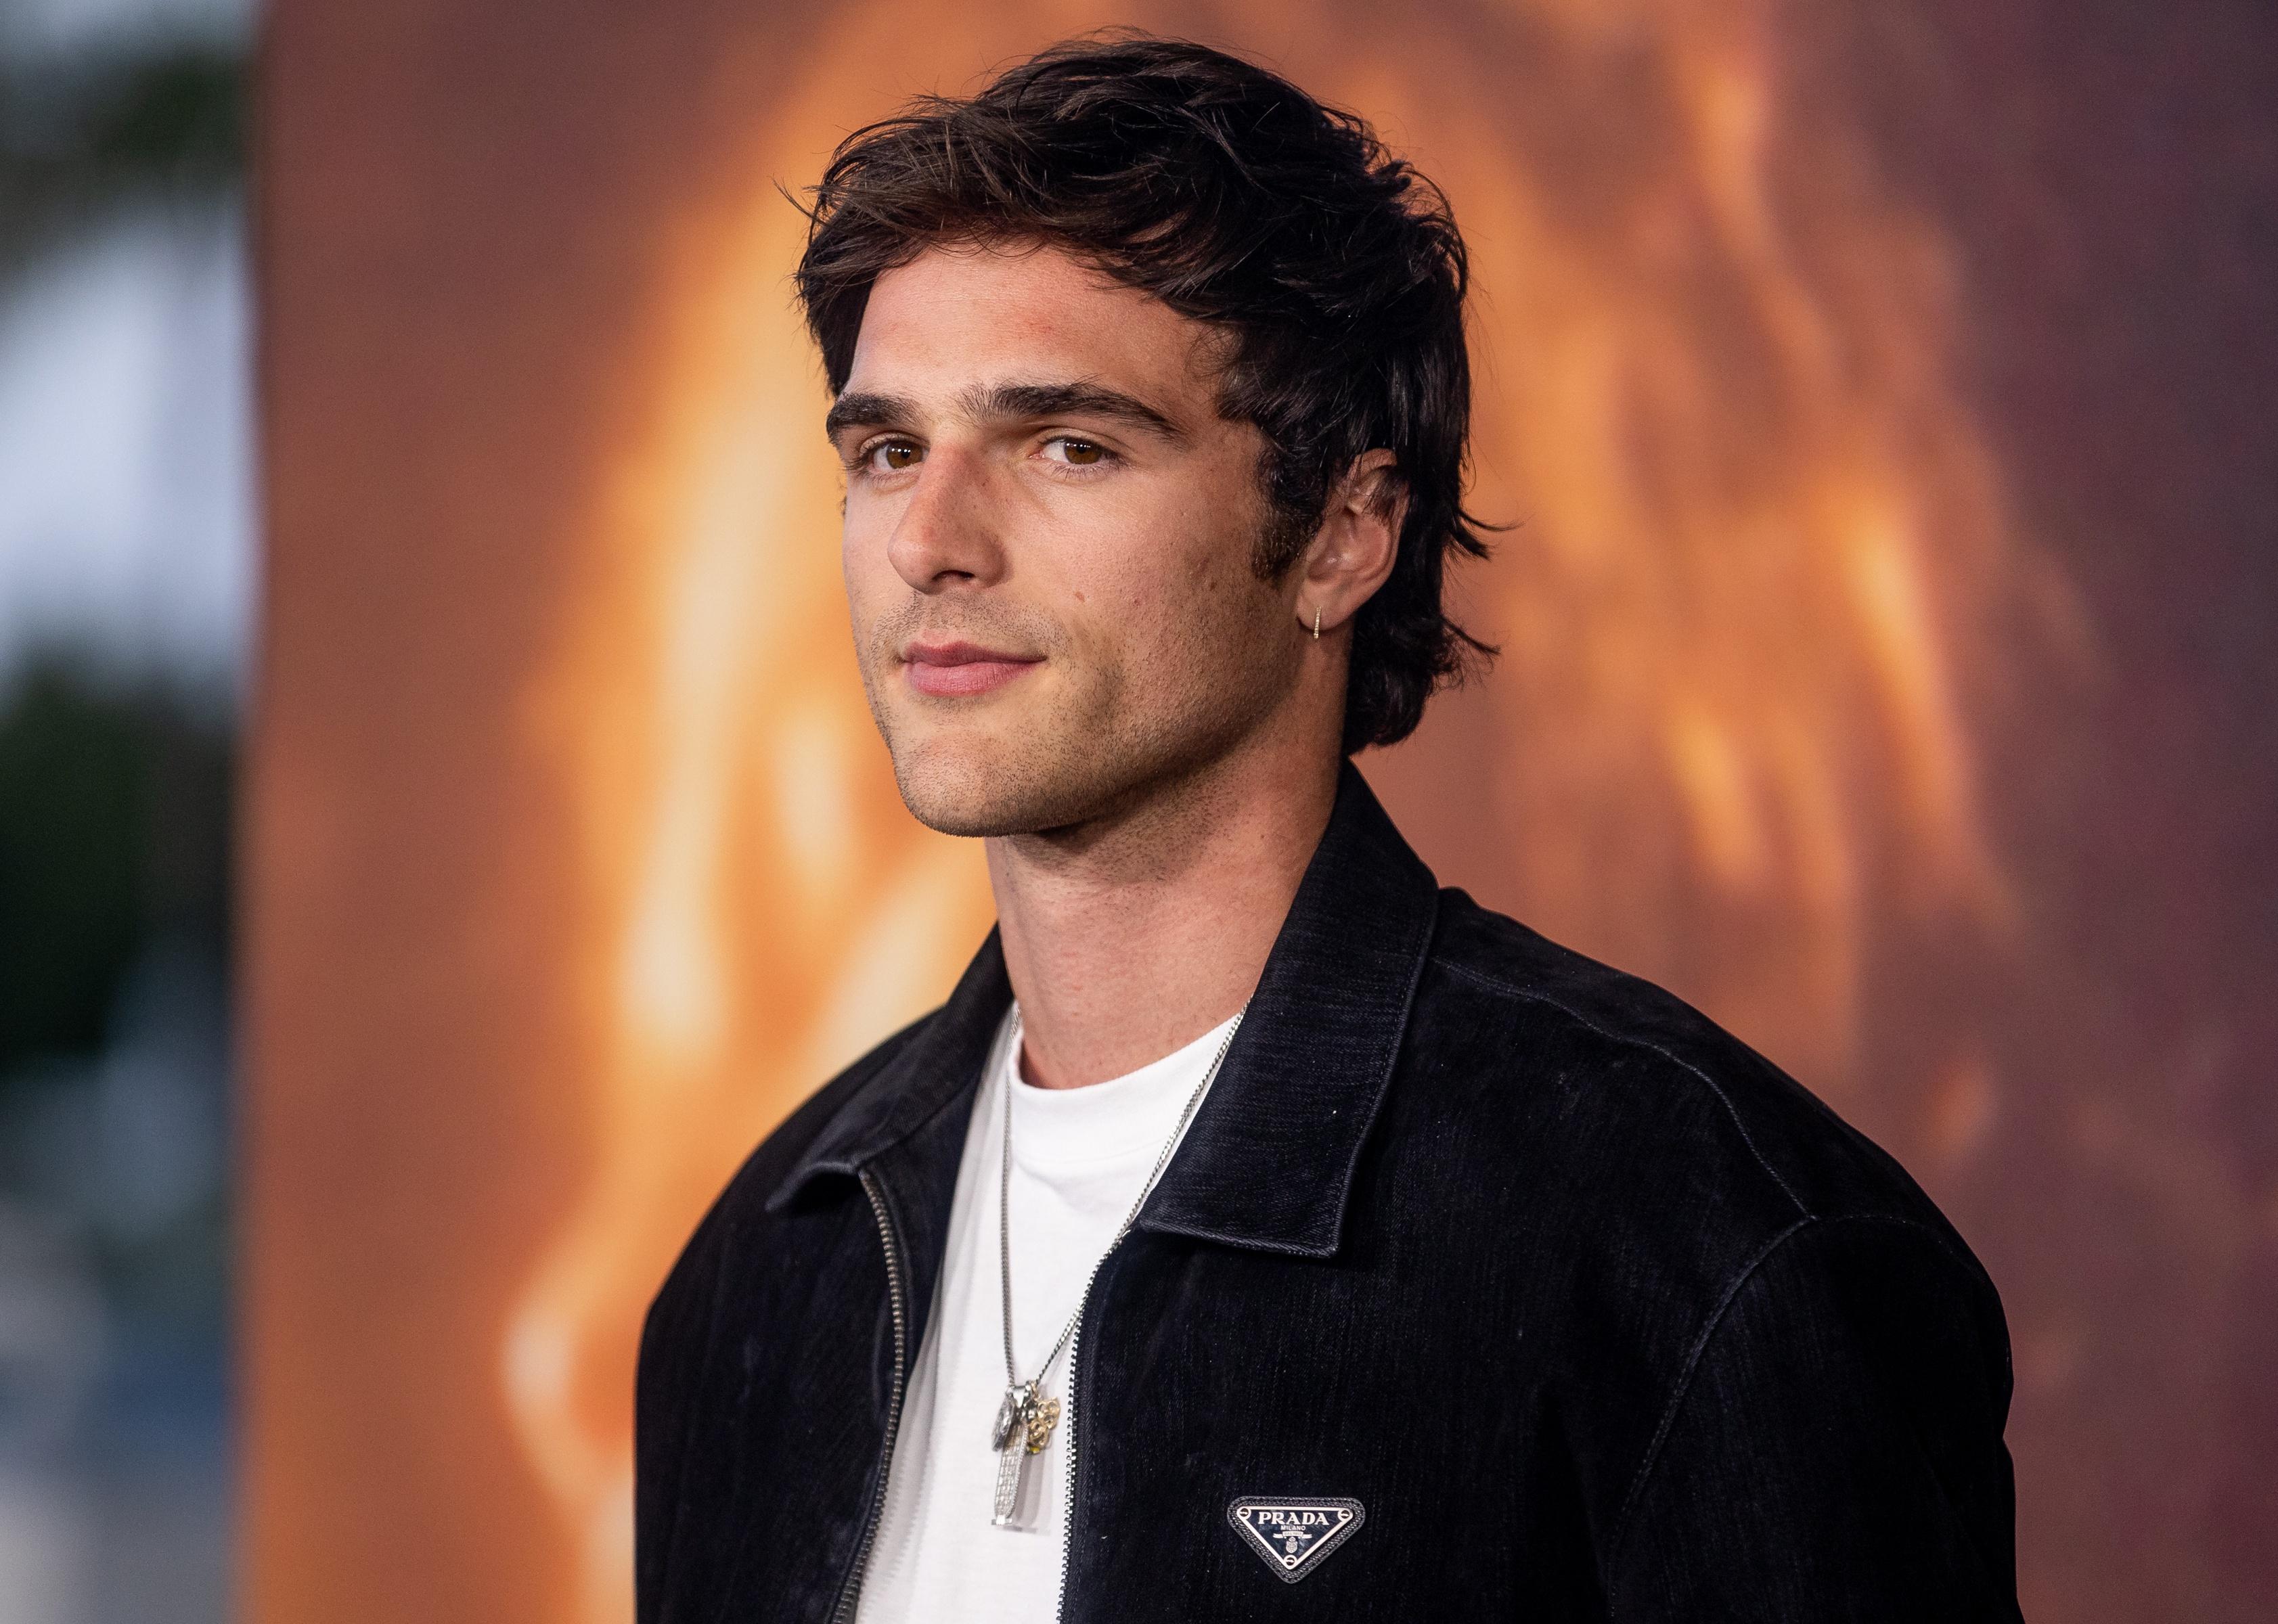 Jacob Elordi attends the HBO Max FYC event for 